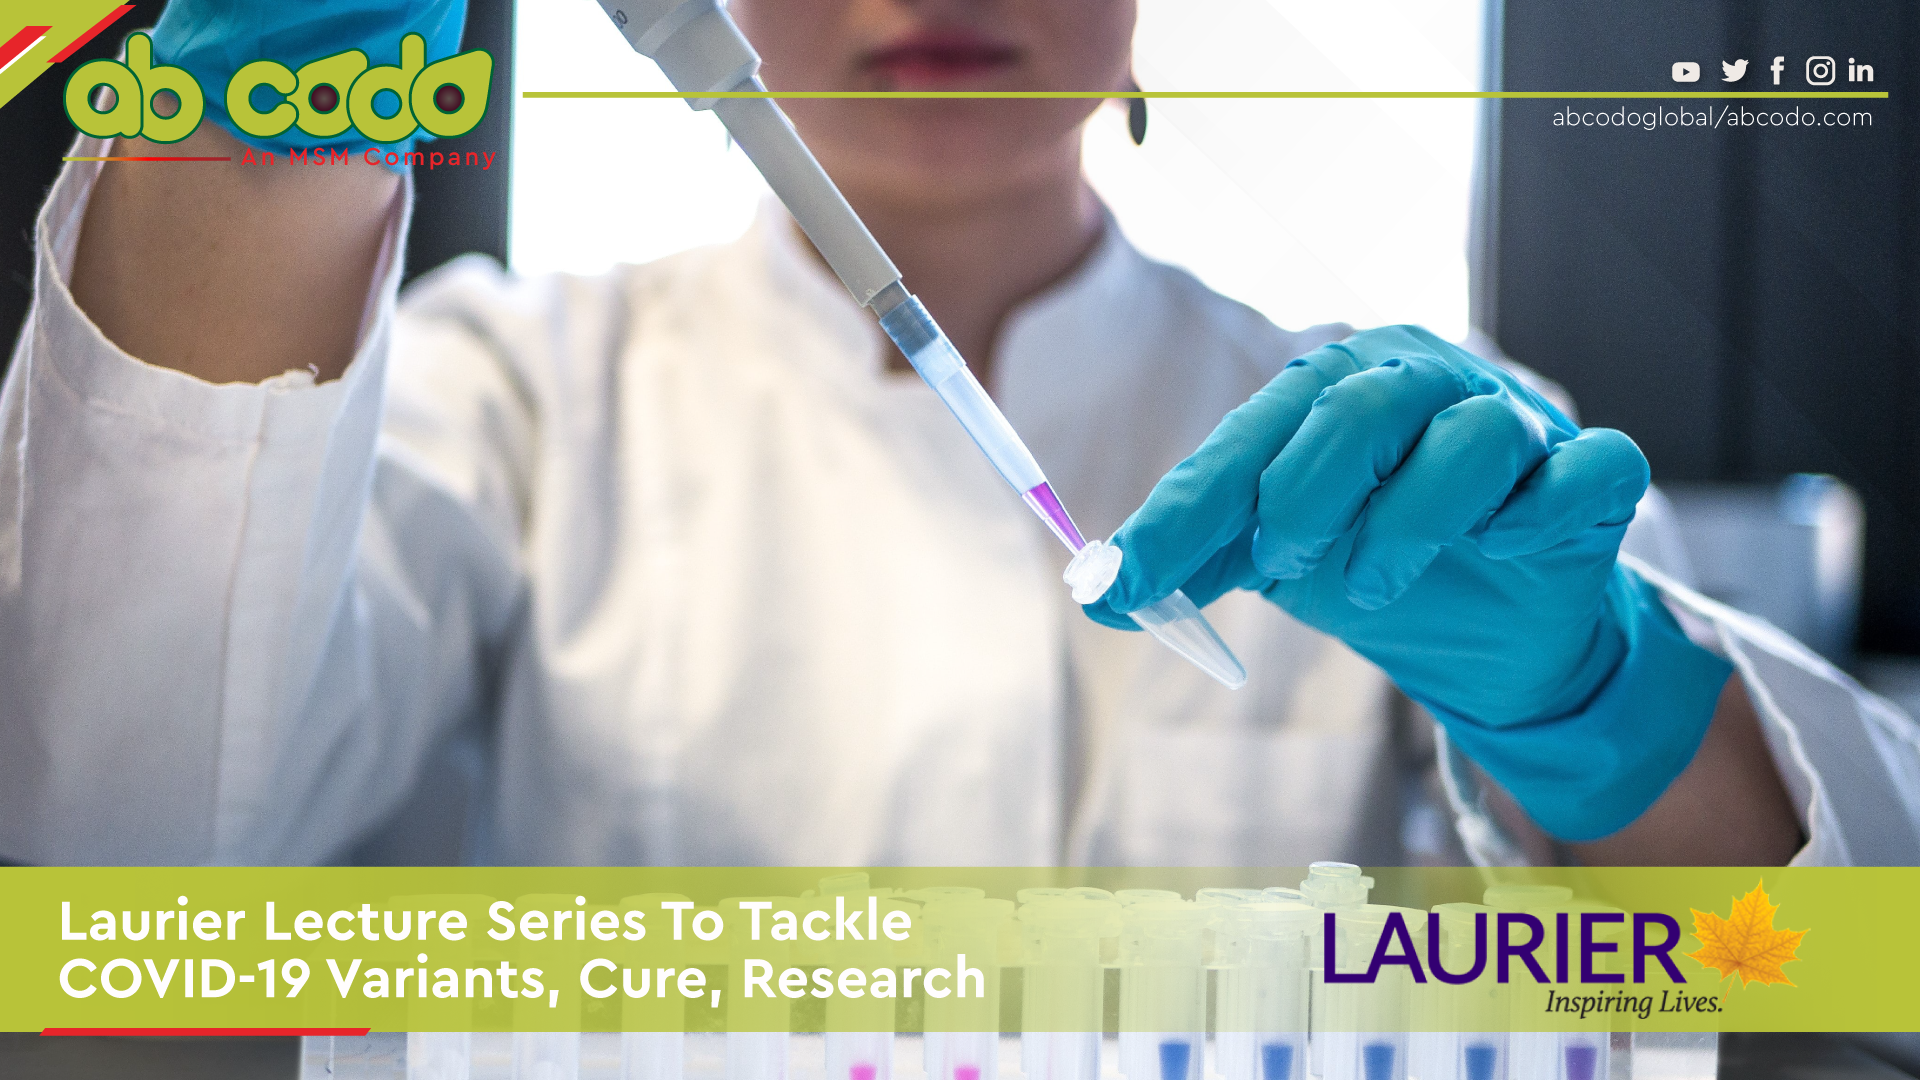 Laurier Lecture Series To Tackle COVID-19 Variants, Cure, Research